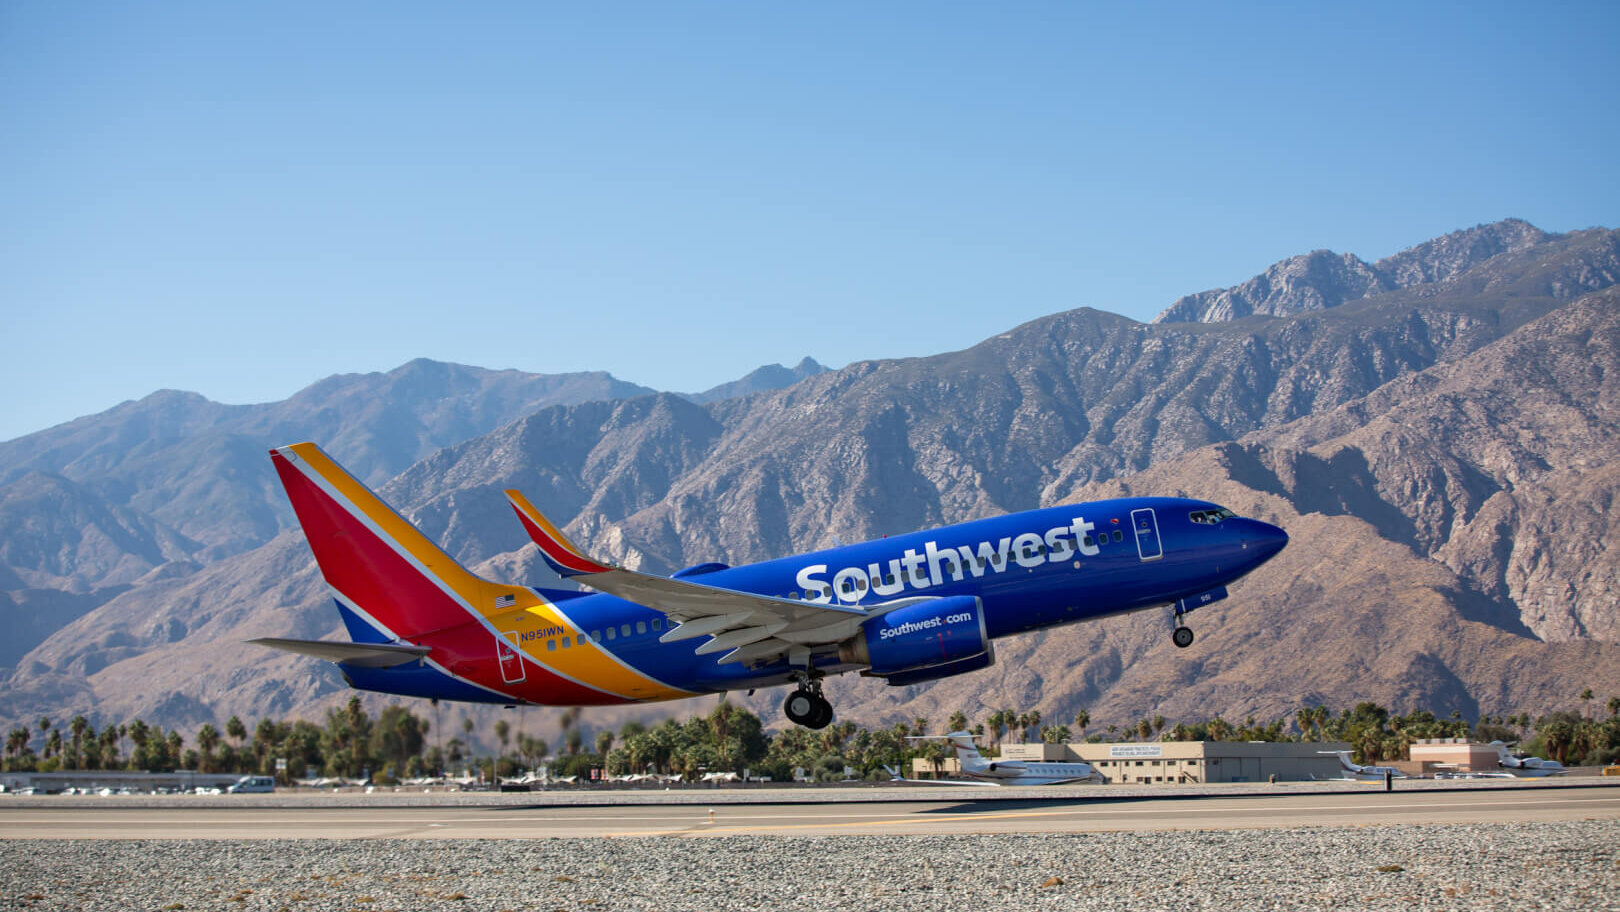 Southwest airplane takes off from Palm Springs airport